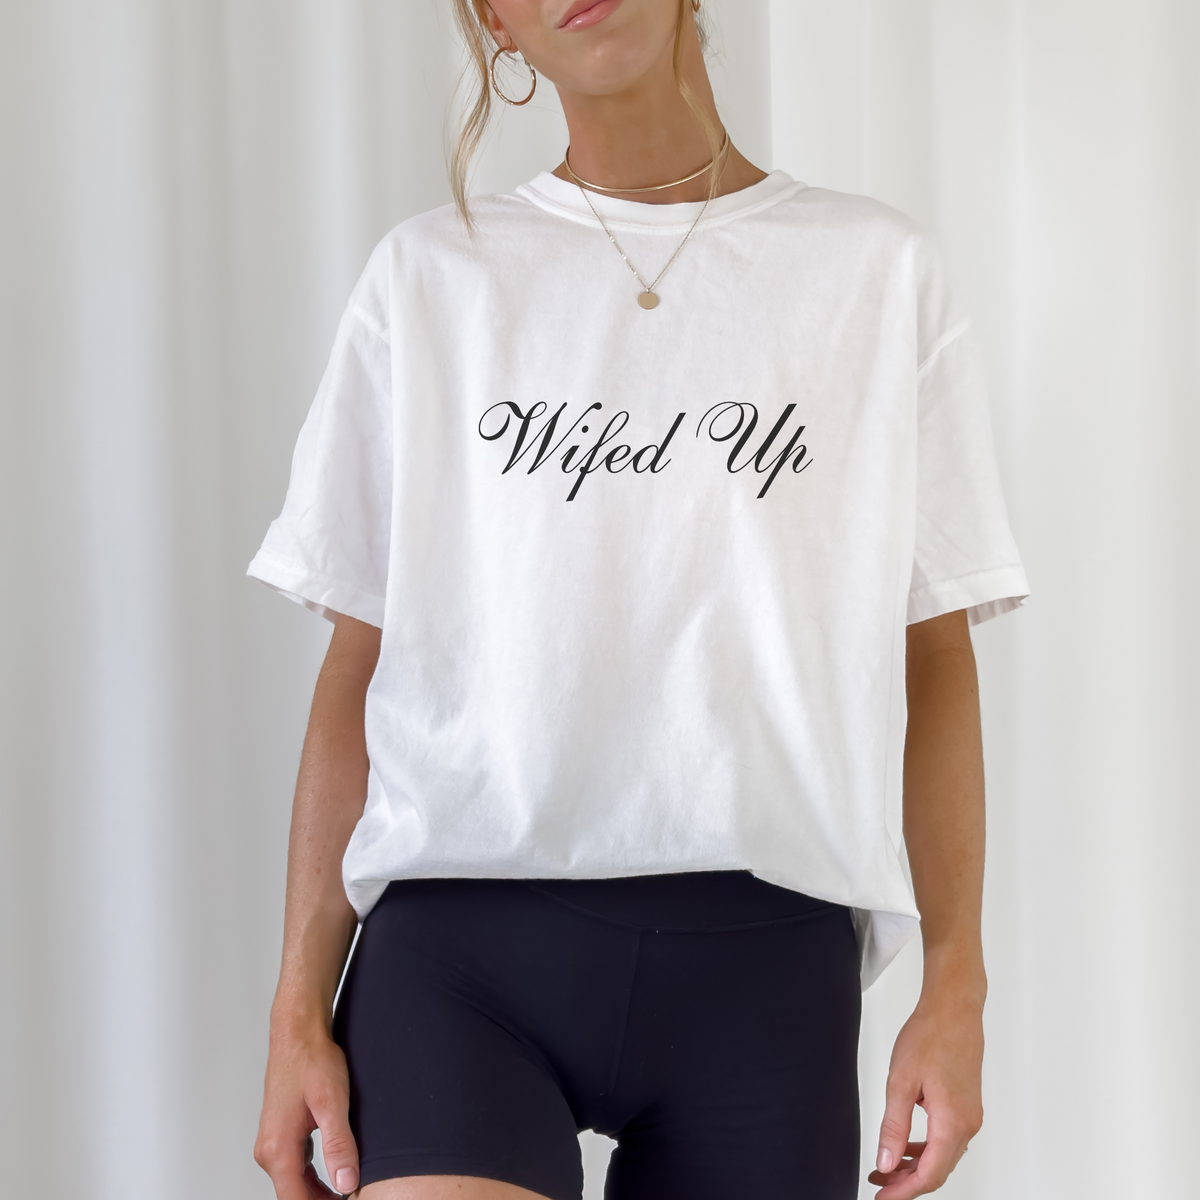 WIFED UP T SHIRT